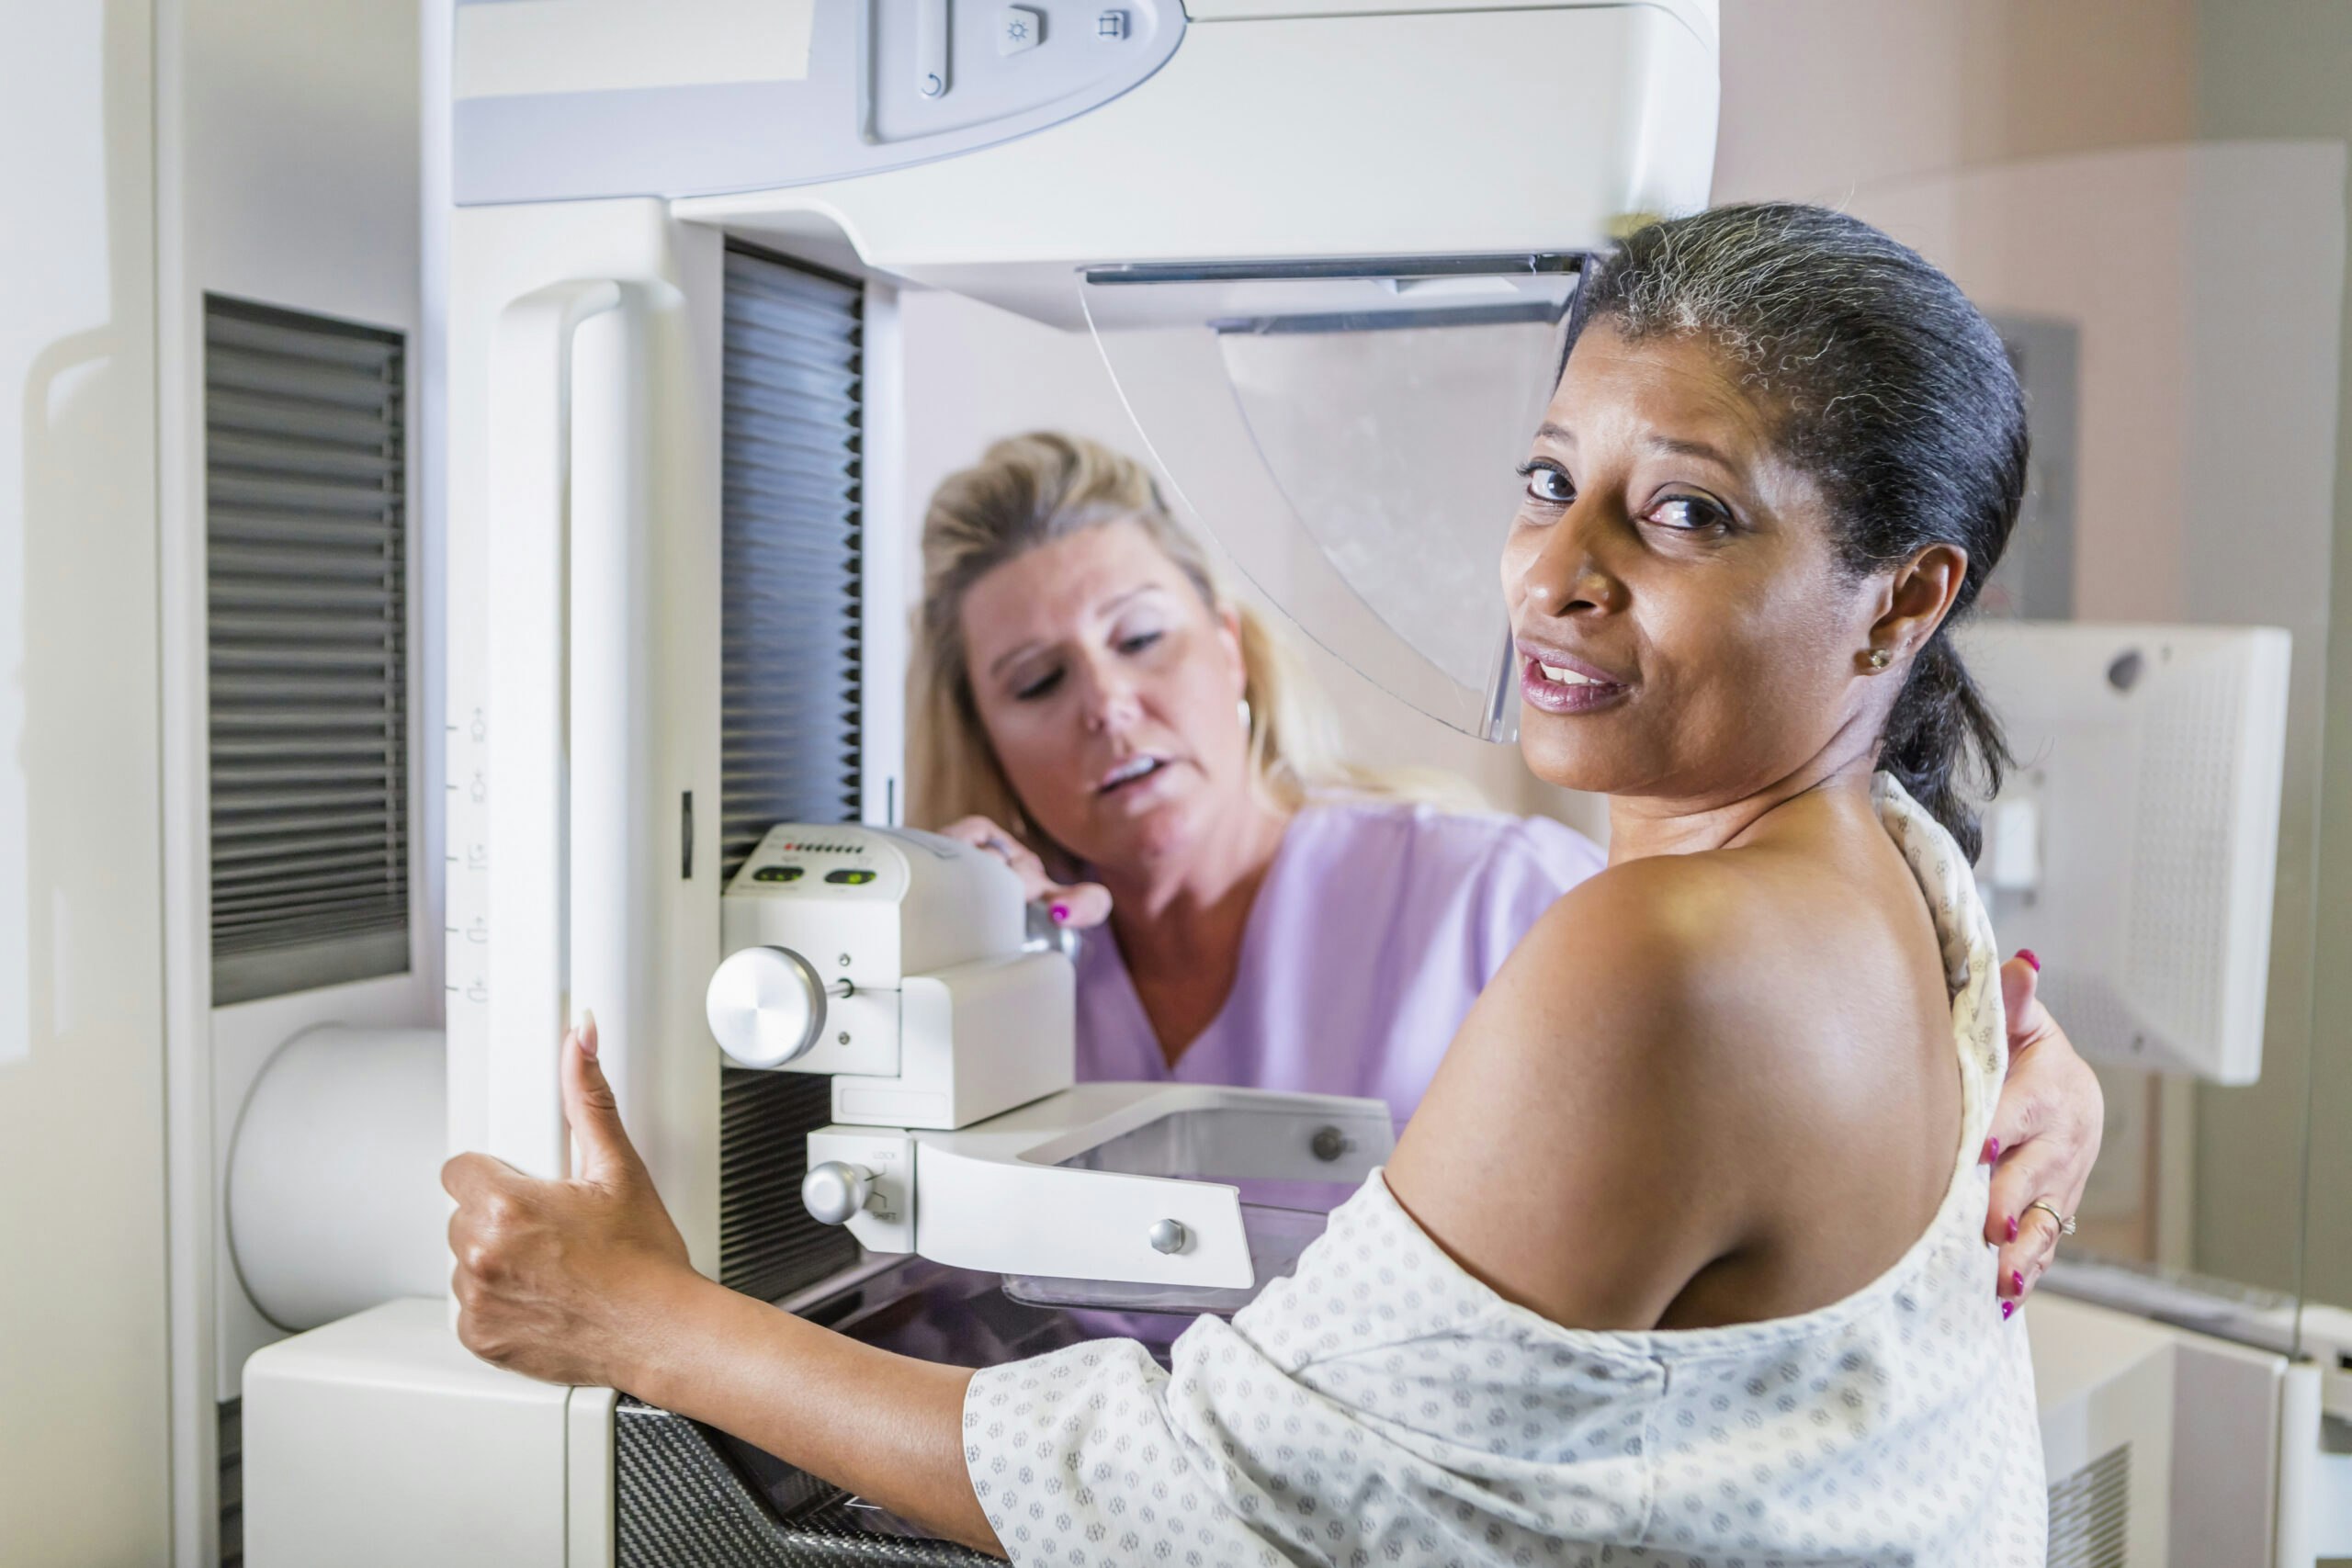 A mature African-American woman in her 40s wearing a hospital gown, getting her annual mammogram. She is being helped by a technologist, a blond woman wearing scrubs. The focus is on the patient, who is looking toward the camera.